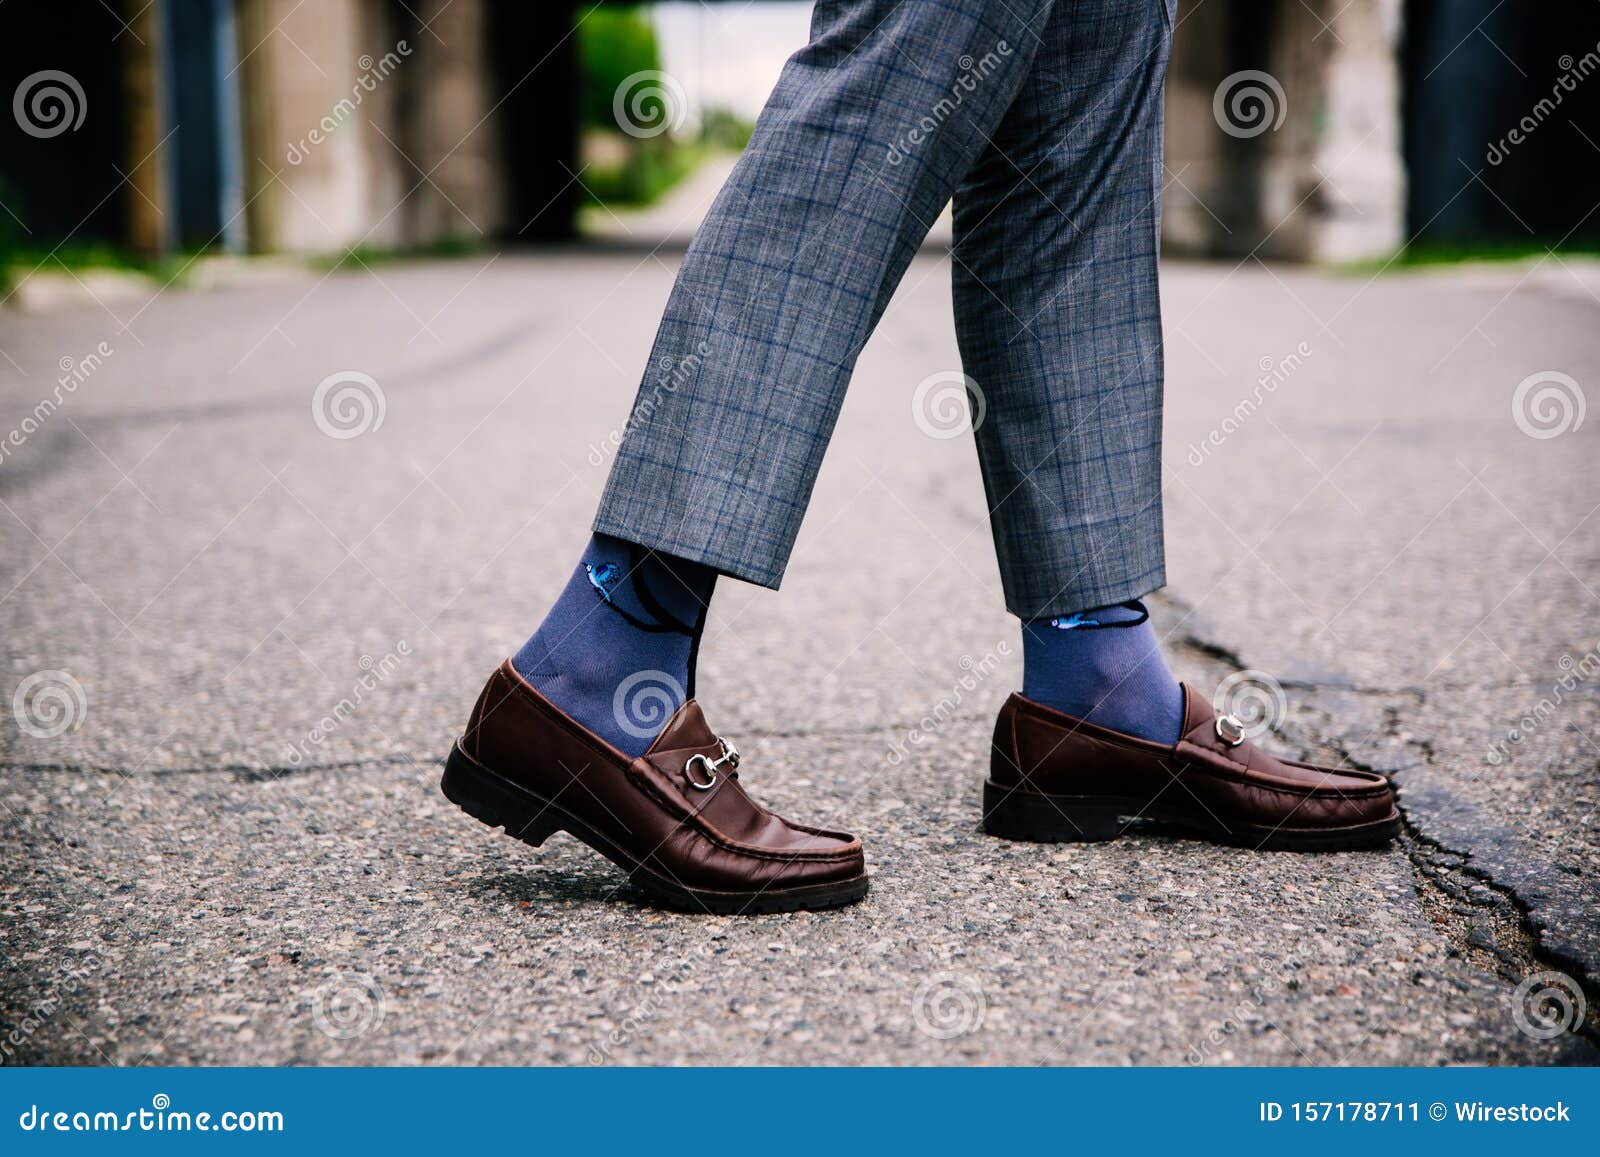 2,123 Blue Pants Brown Shoes What Color Shirt Royalty-Free Images, Stock  Photos & Pictures | Shutterstock